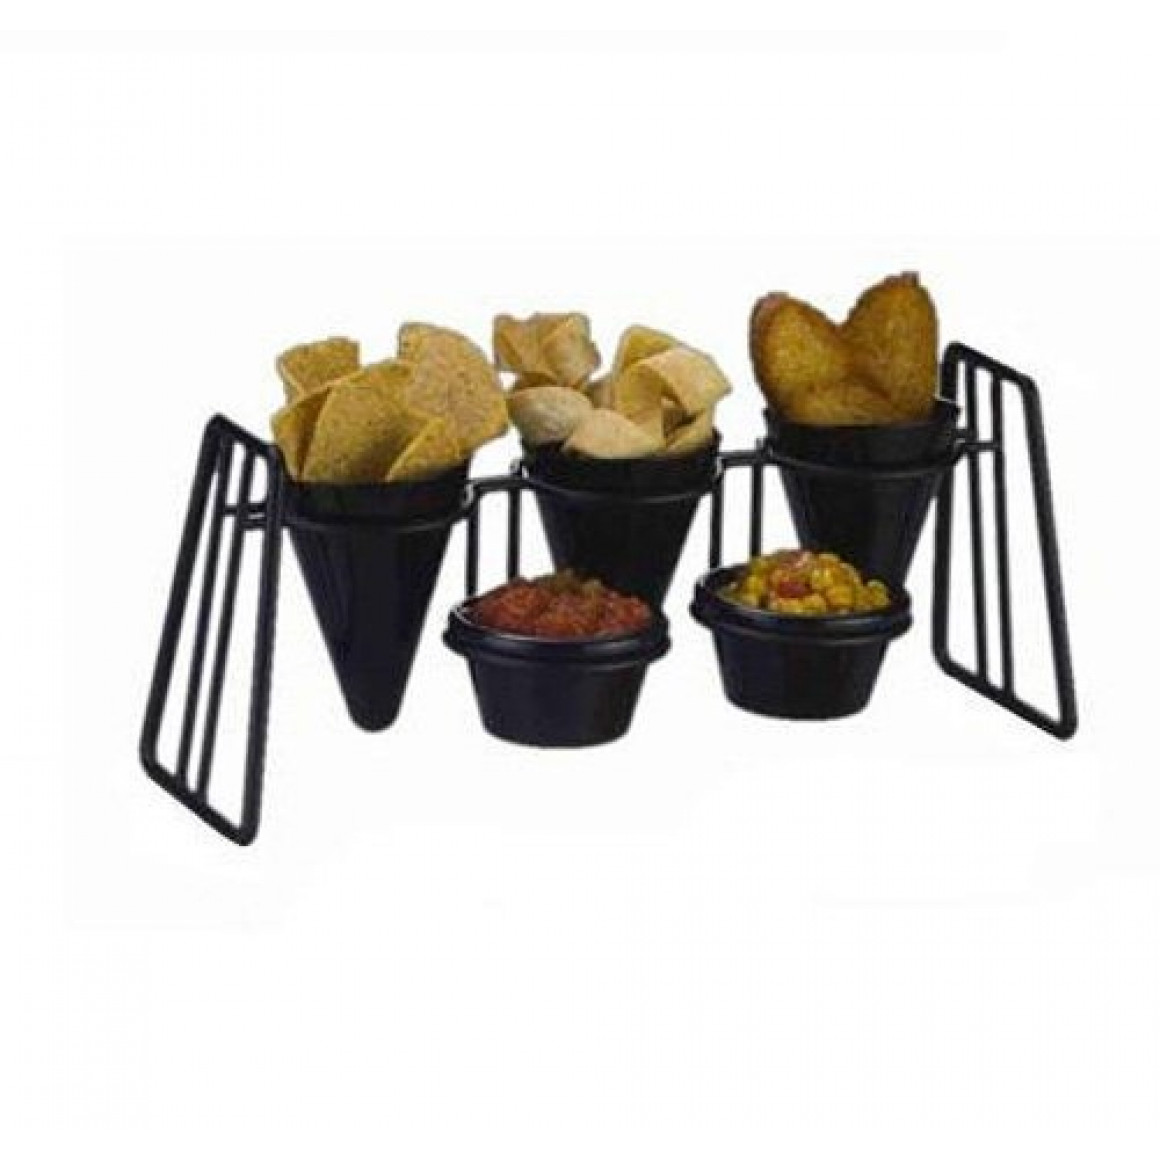 5 Tier fry cone stand